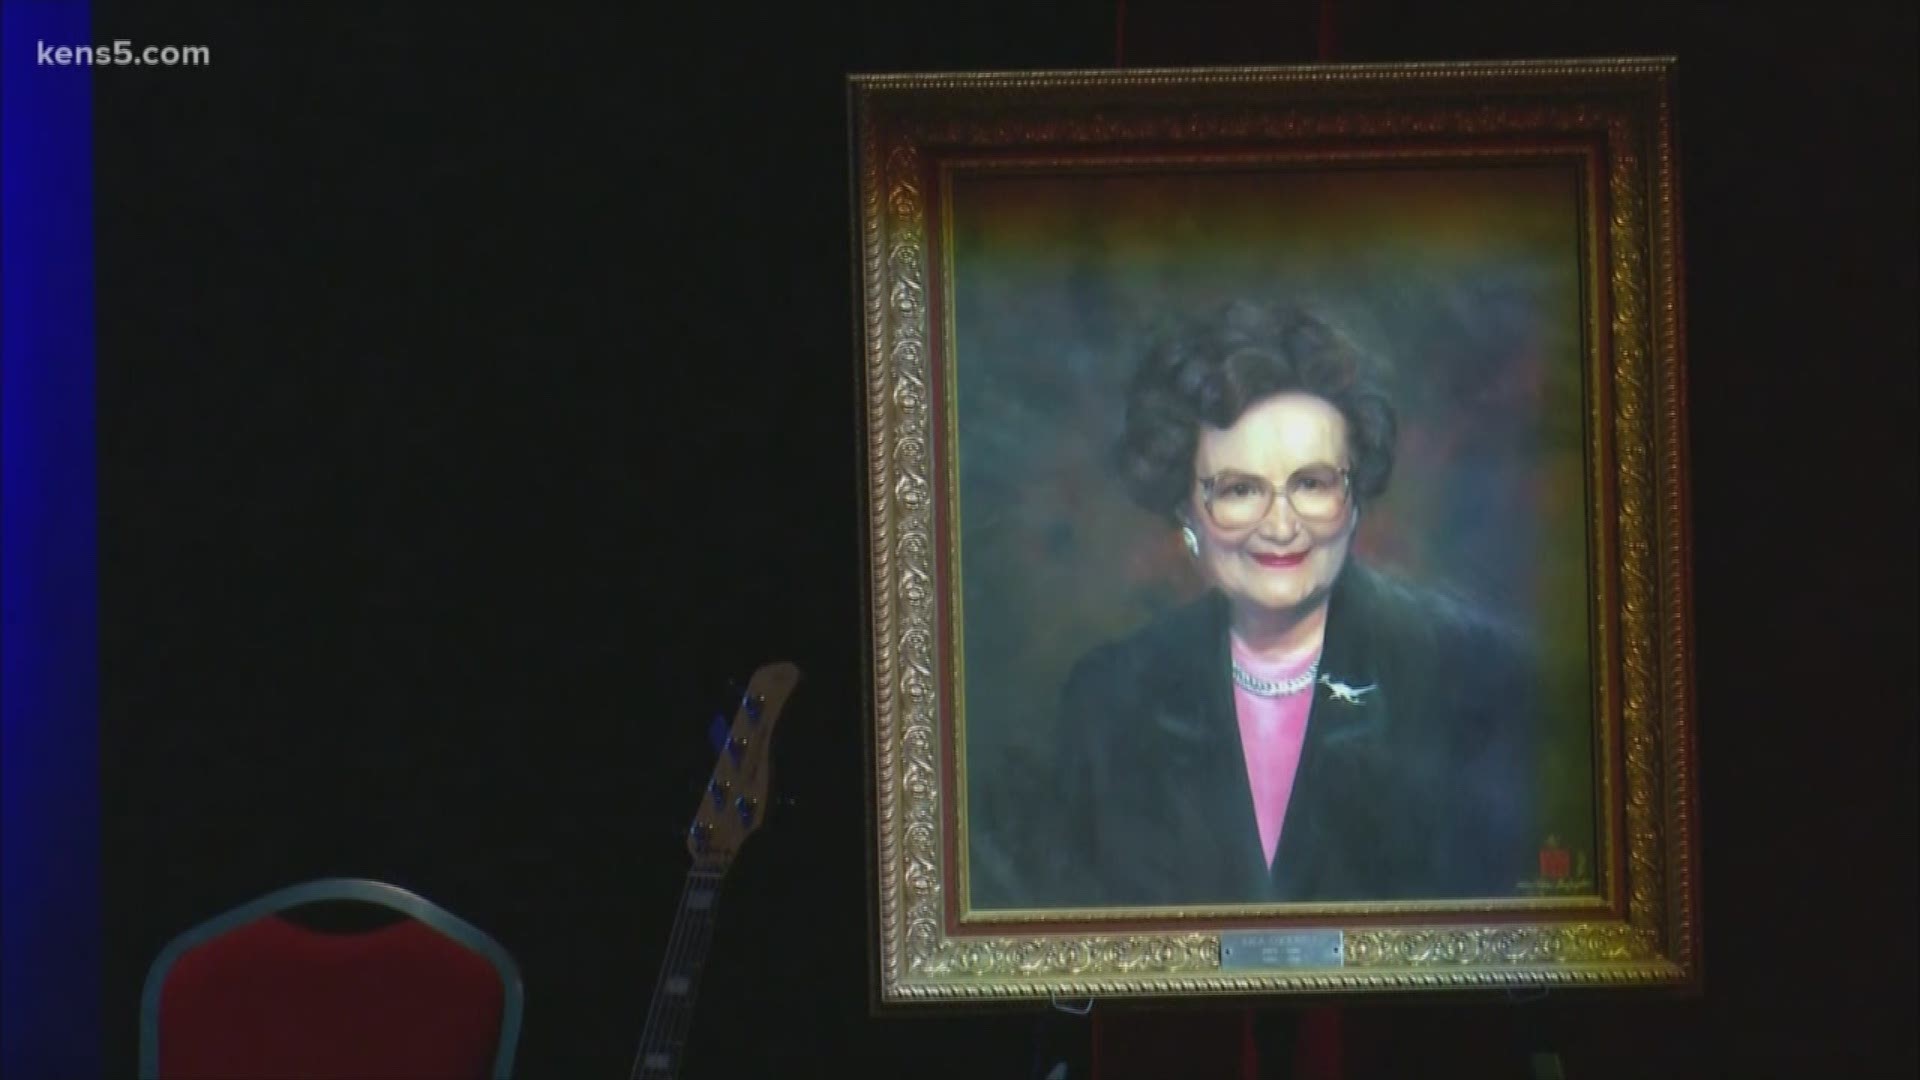 San Antonio's first female mayor died a few days ago at 97. At the downtown theater named after her on Thursday, city leaders past and present spoke on her legacy.